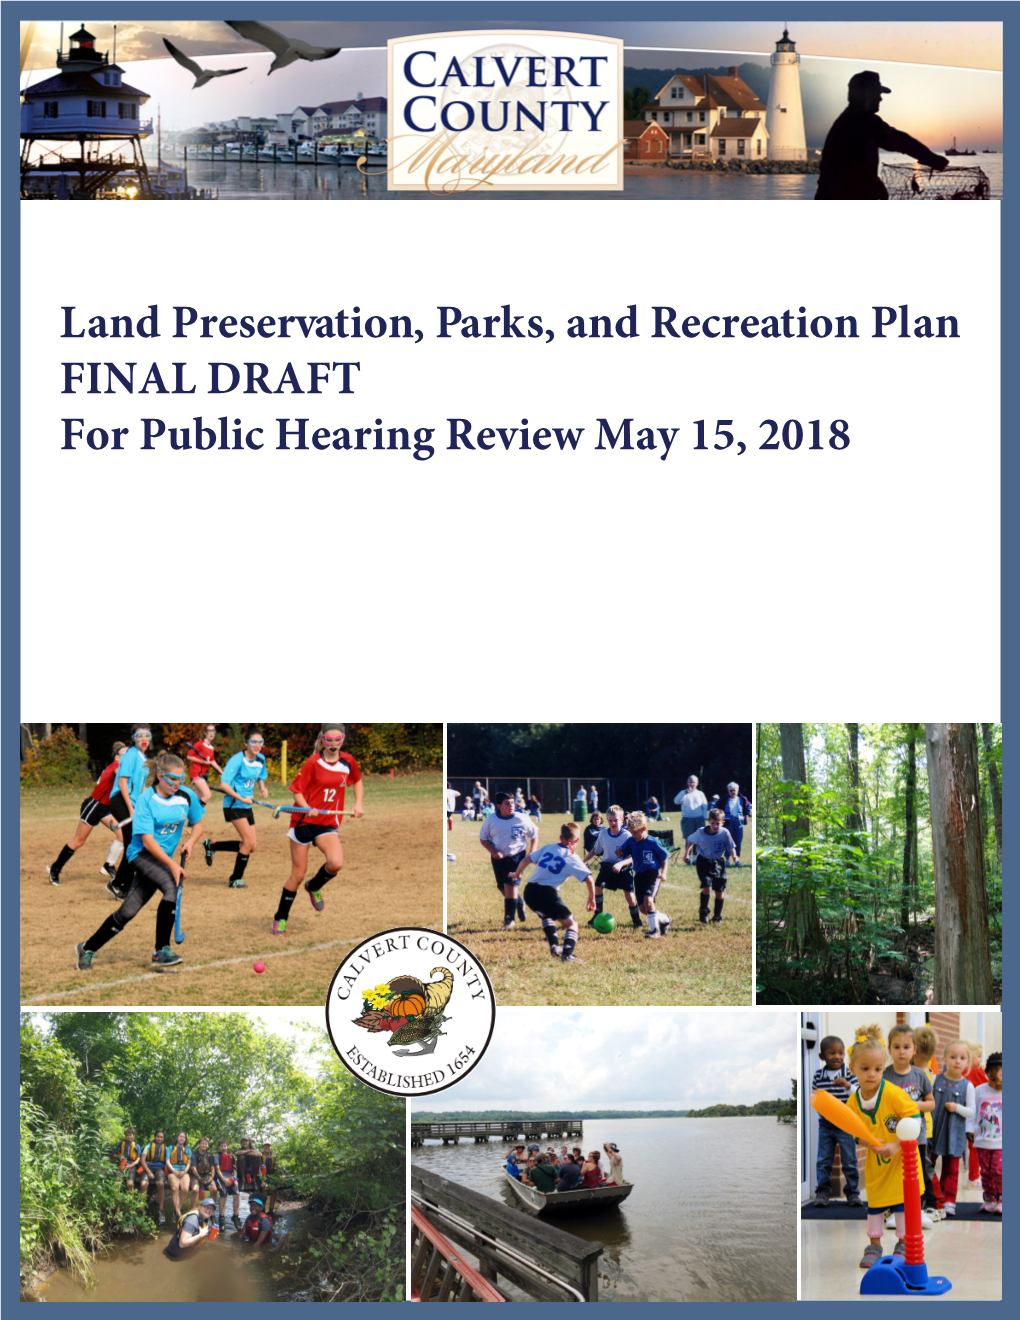 Land Preservation, Parks, and Recreation Plan FINAL DRAFT for Public Hearing Review May 15, 2018